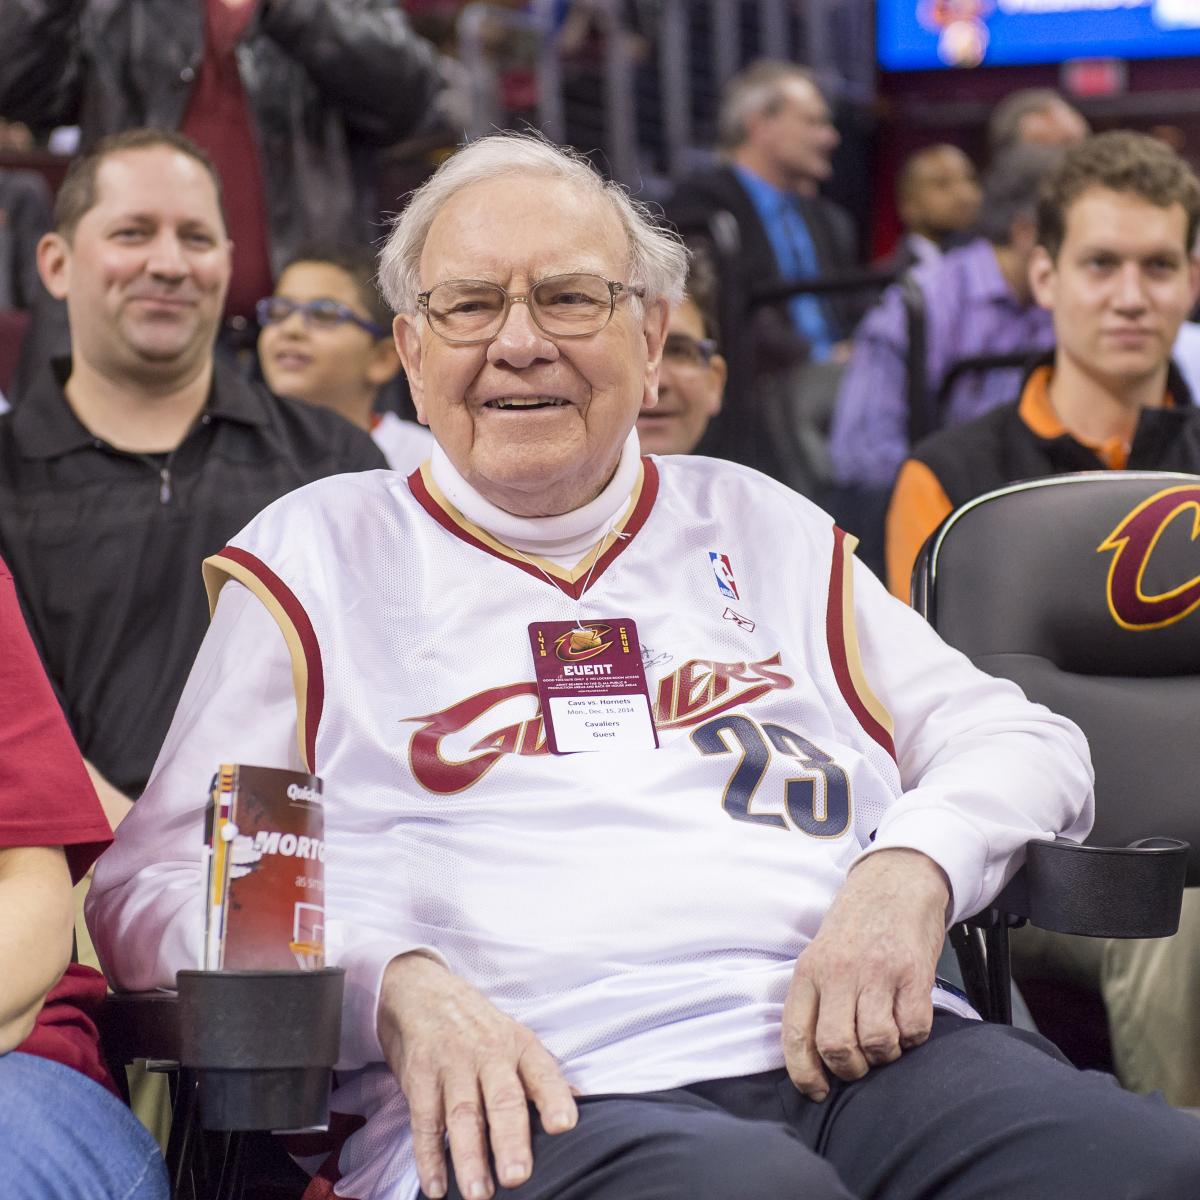 Marquette's Loss to South Carolina Cost a Berkshire Hathaway Employee ...